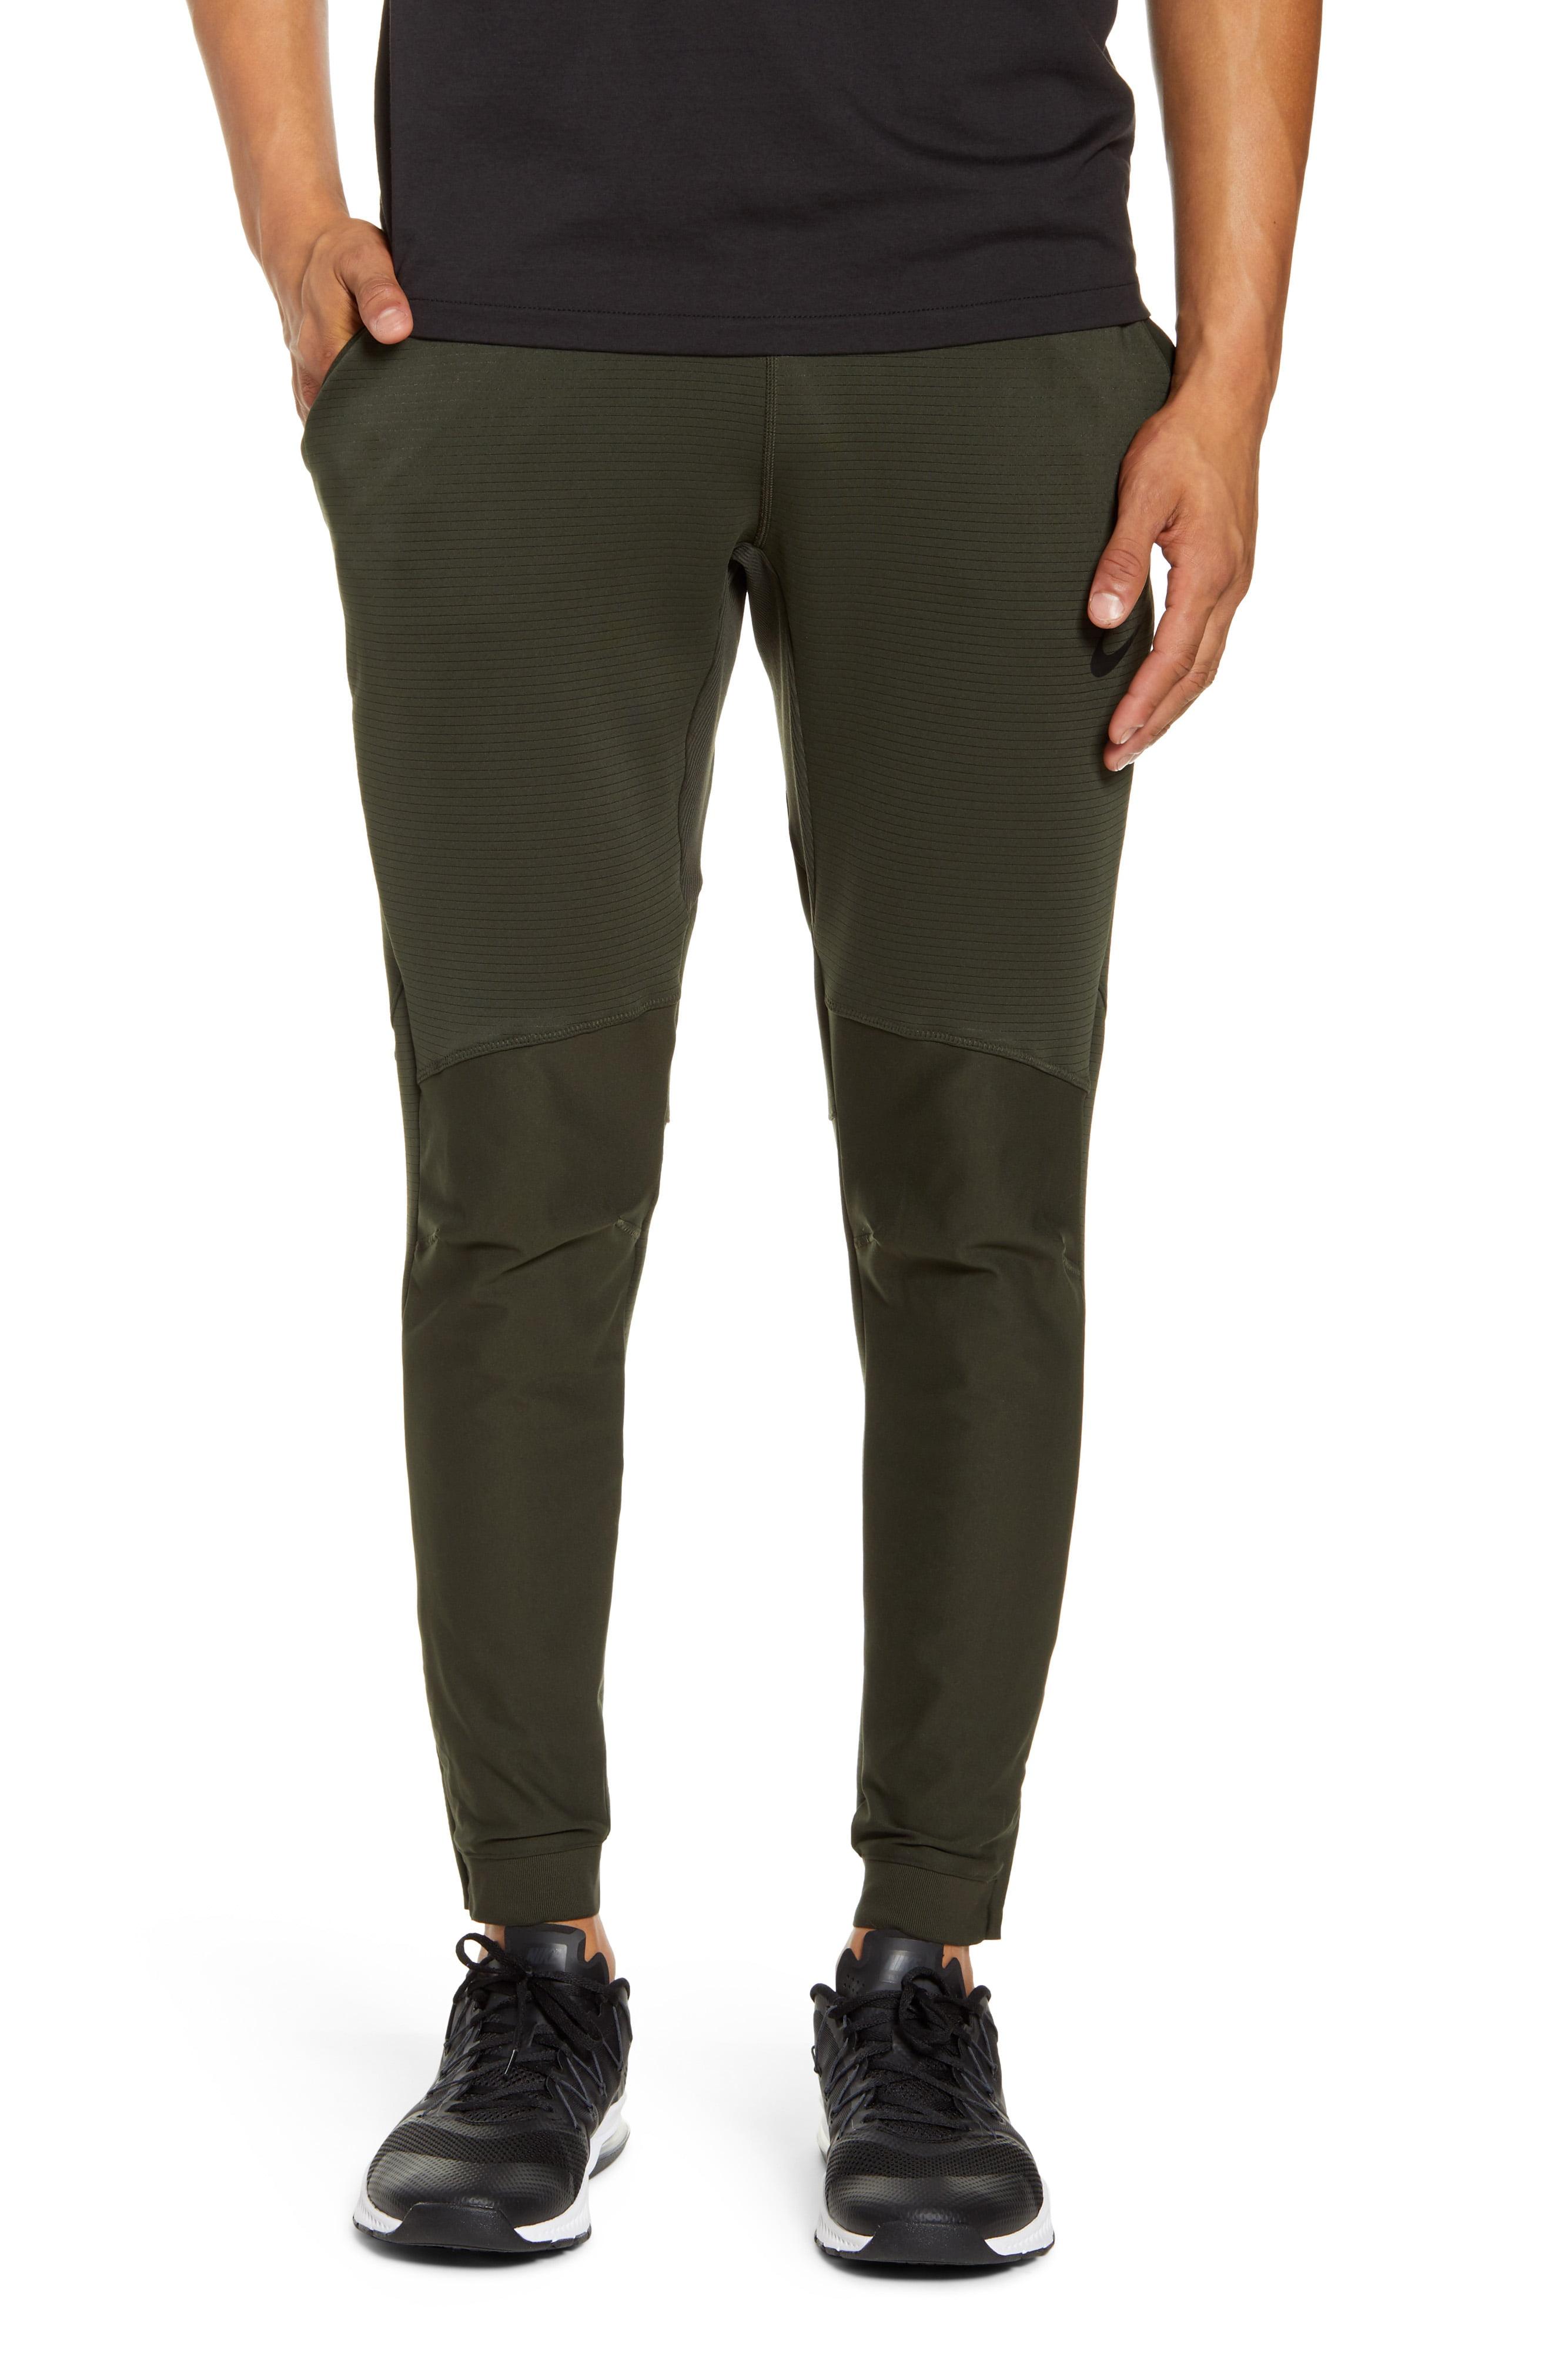 Nike Synthetic Pro Trousers in Green for Men - Lyst